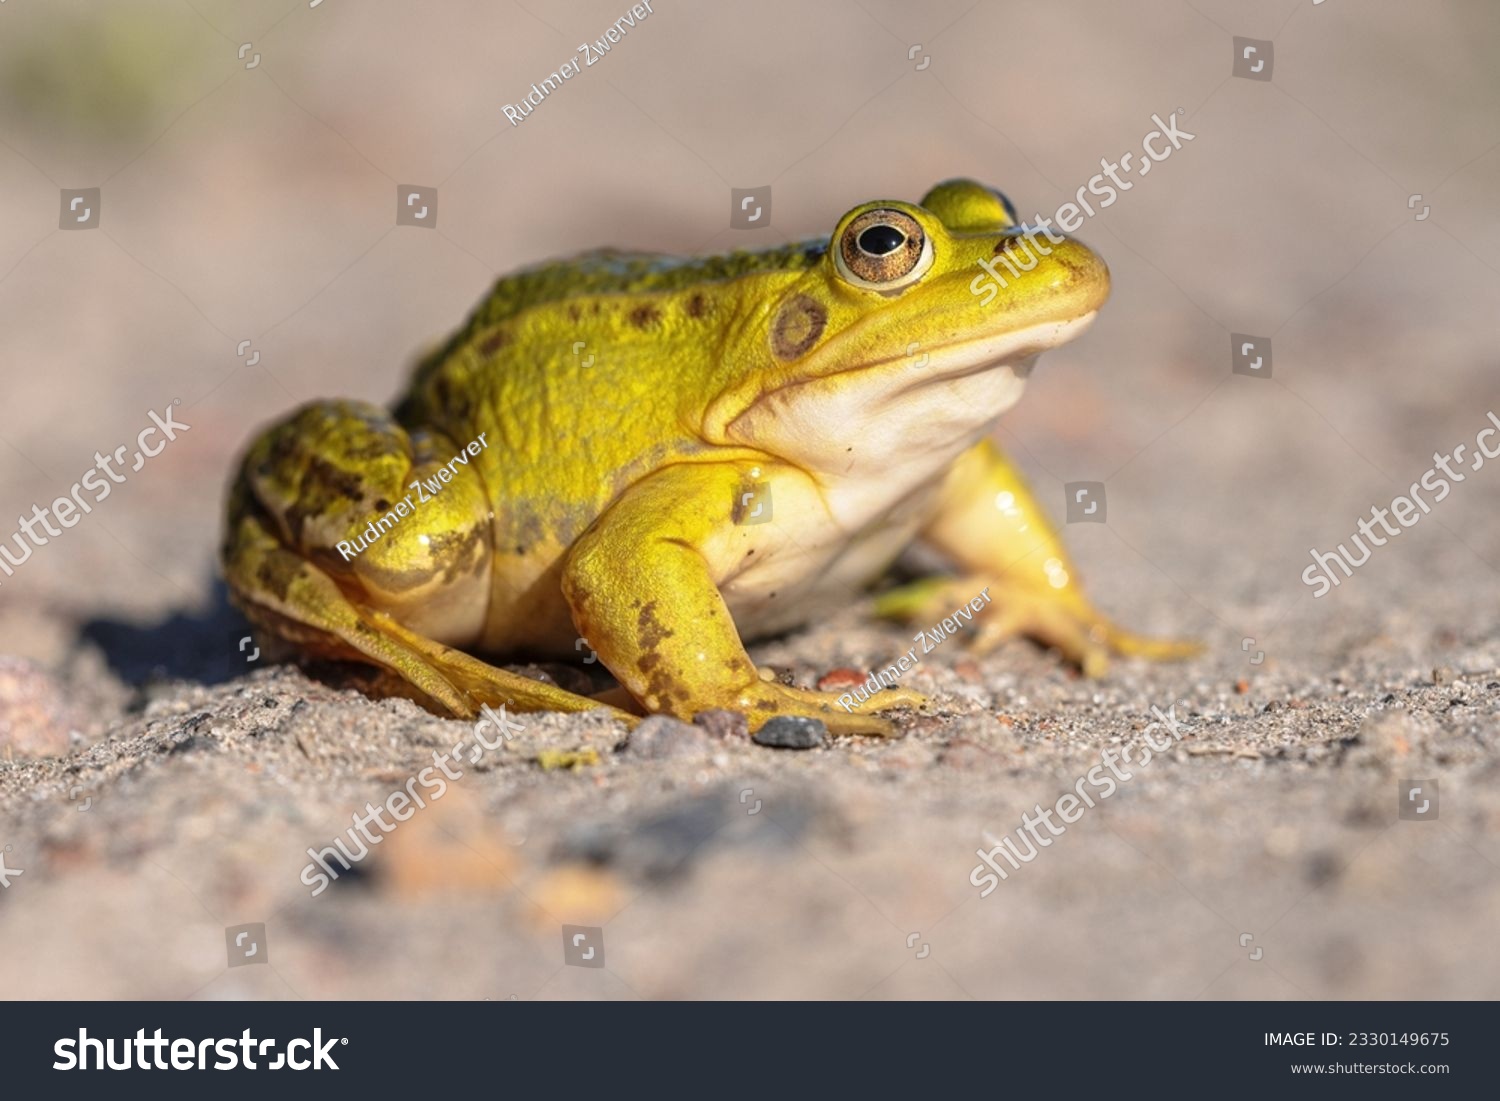 Pool Frog (Pelophylax lessonae) is a European frog in the family Ranidae. Reasons for declining populations are air pollution leading to over-nitrification of pond waters. Wildlife Scene of Nature  #2330149675